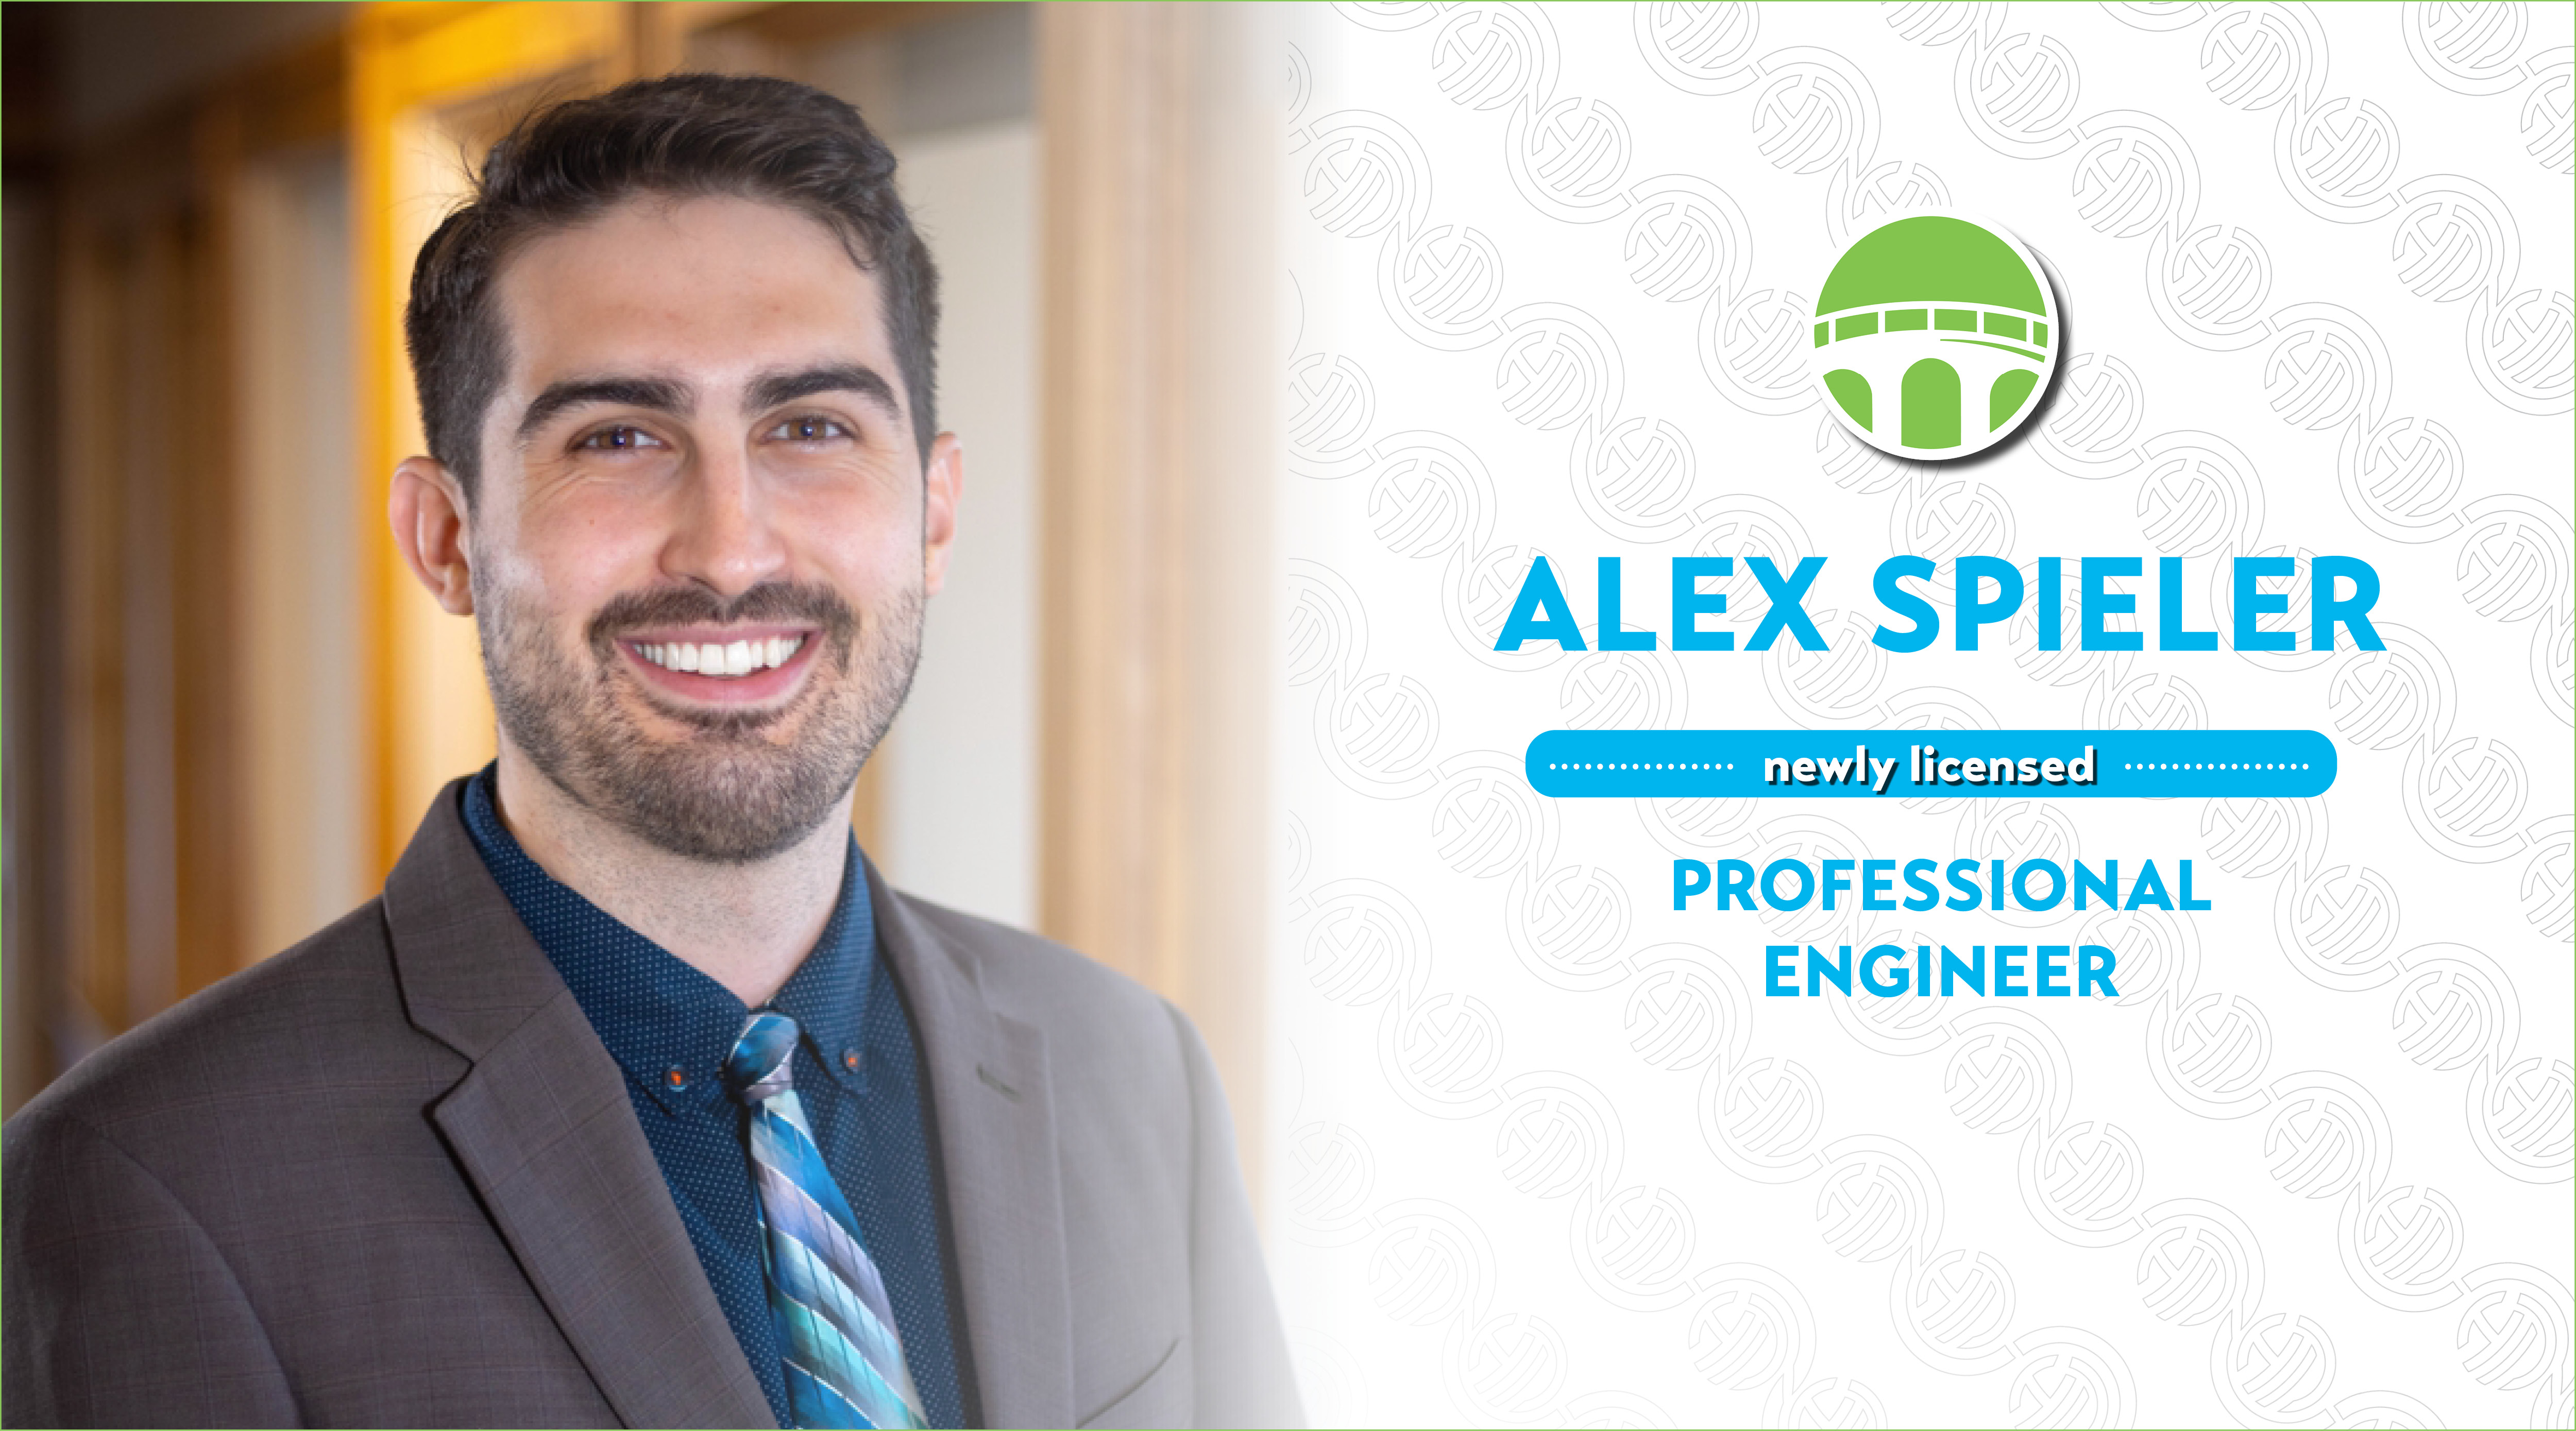 Alex Speiler's corporate headshot is next to the Hoyle Tanner repeating logo and the name of the article, along with a bright green bridge design icon